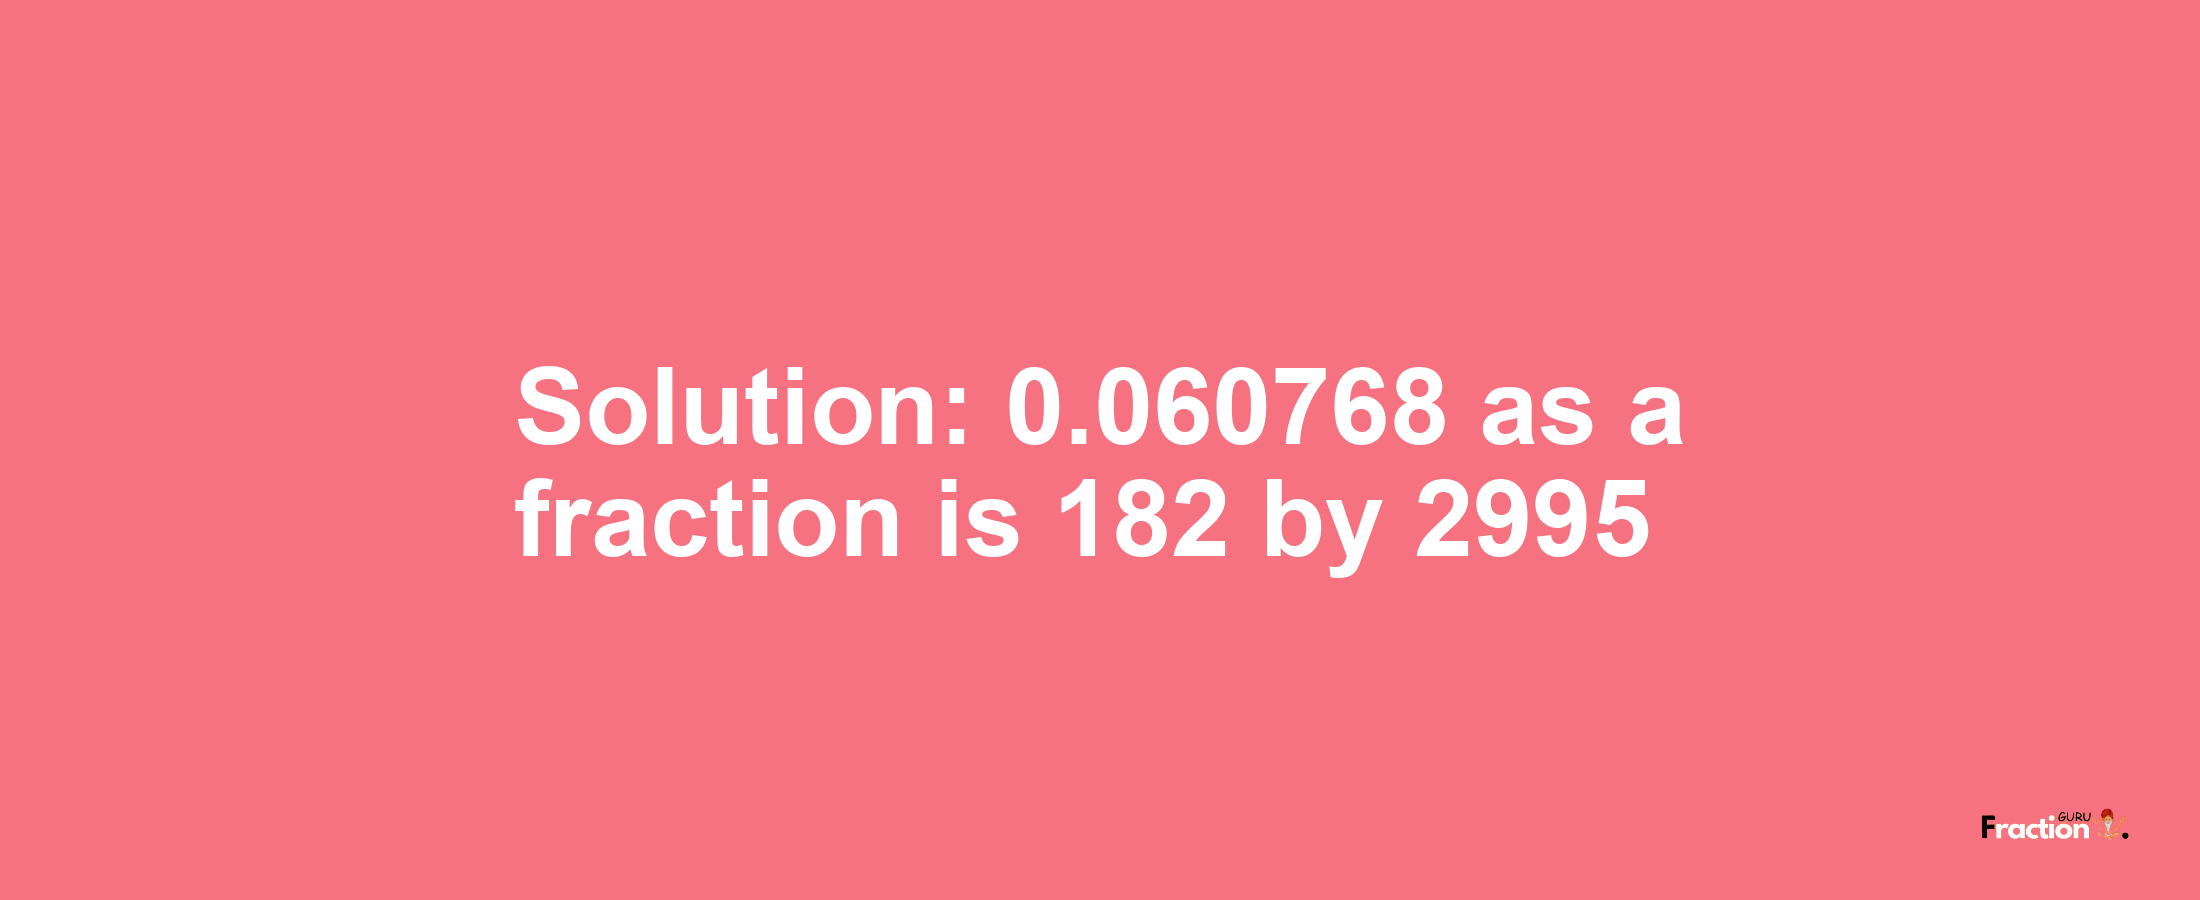 Solution:0.060768 as a fraction is 182/2995